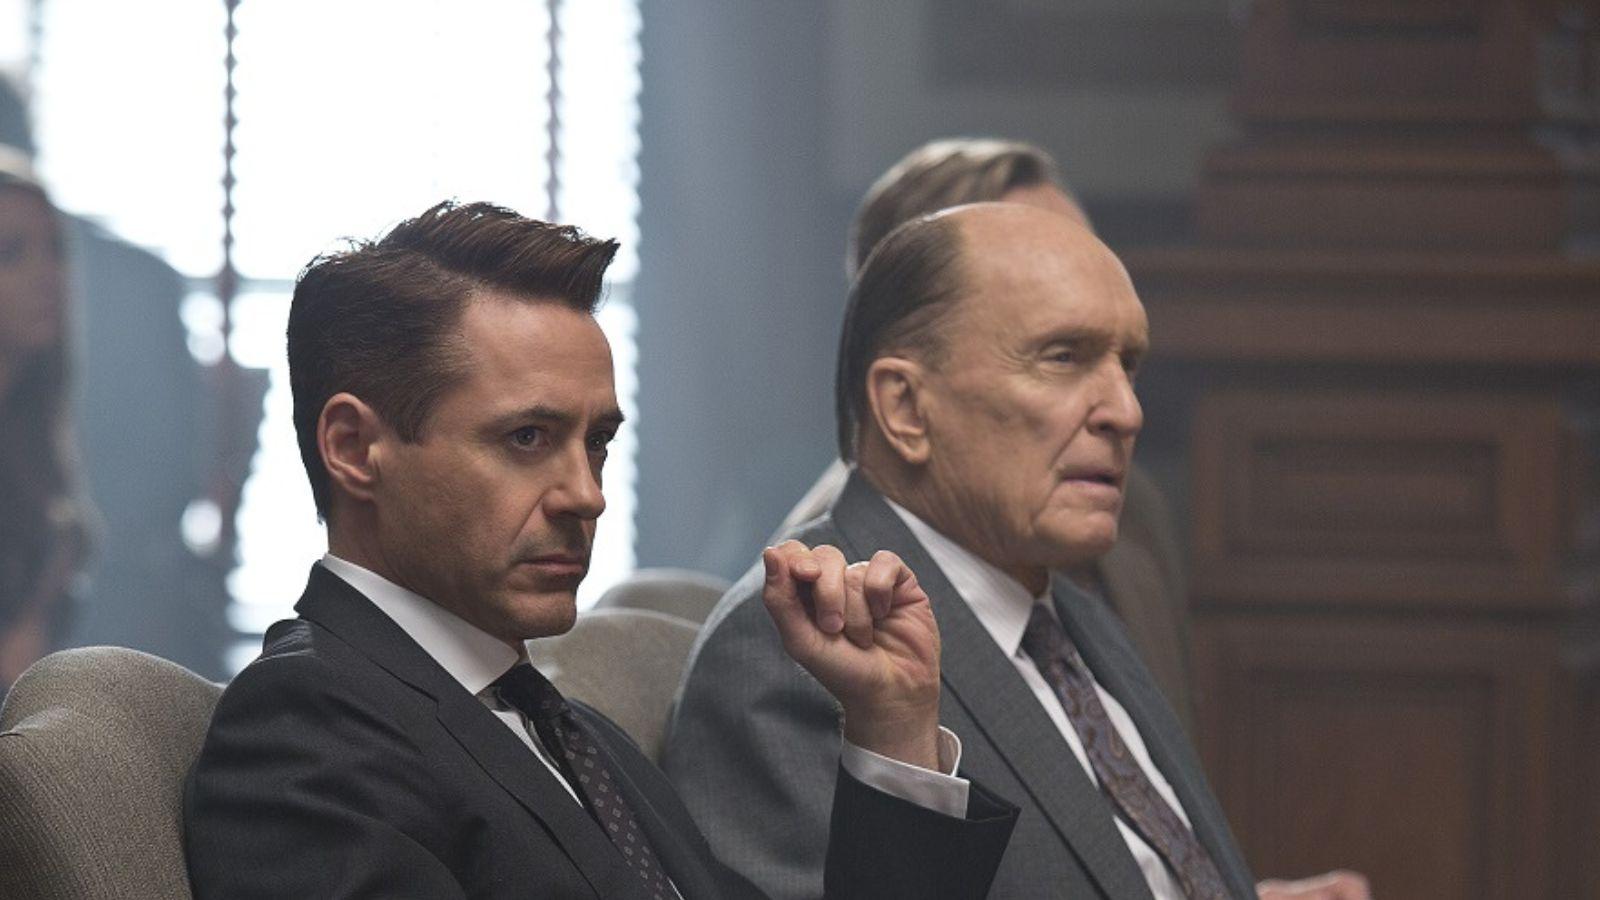 A still from the trailer of The Judge